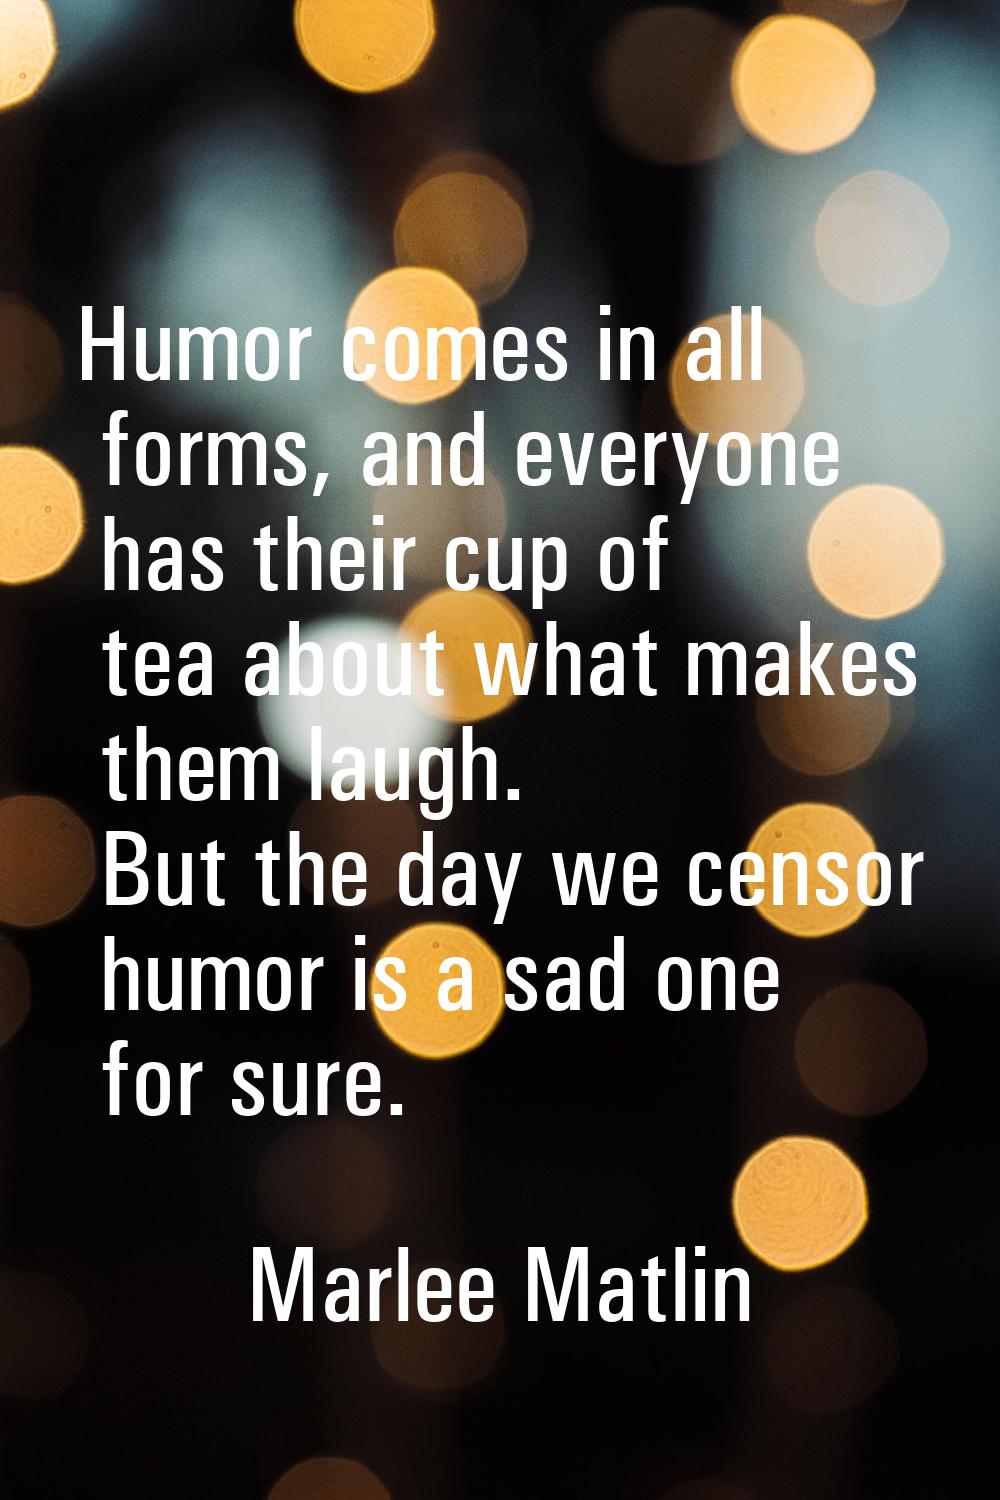 Humor comes in all forms, and everyone has their cup of tea about what makes them laugh. But the da